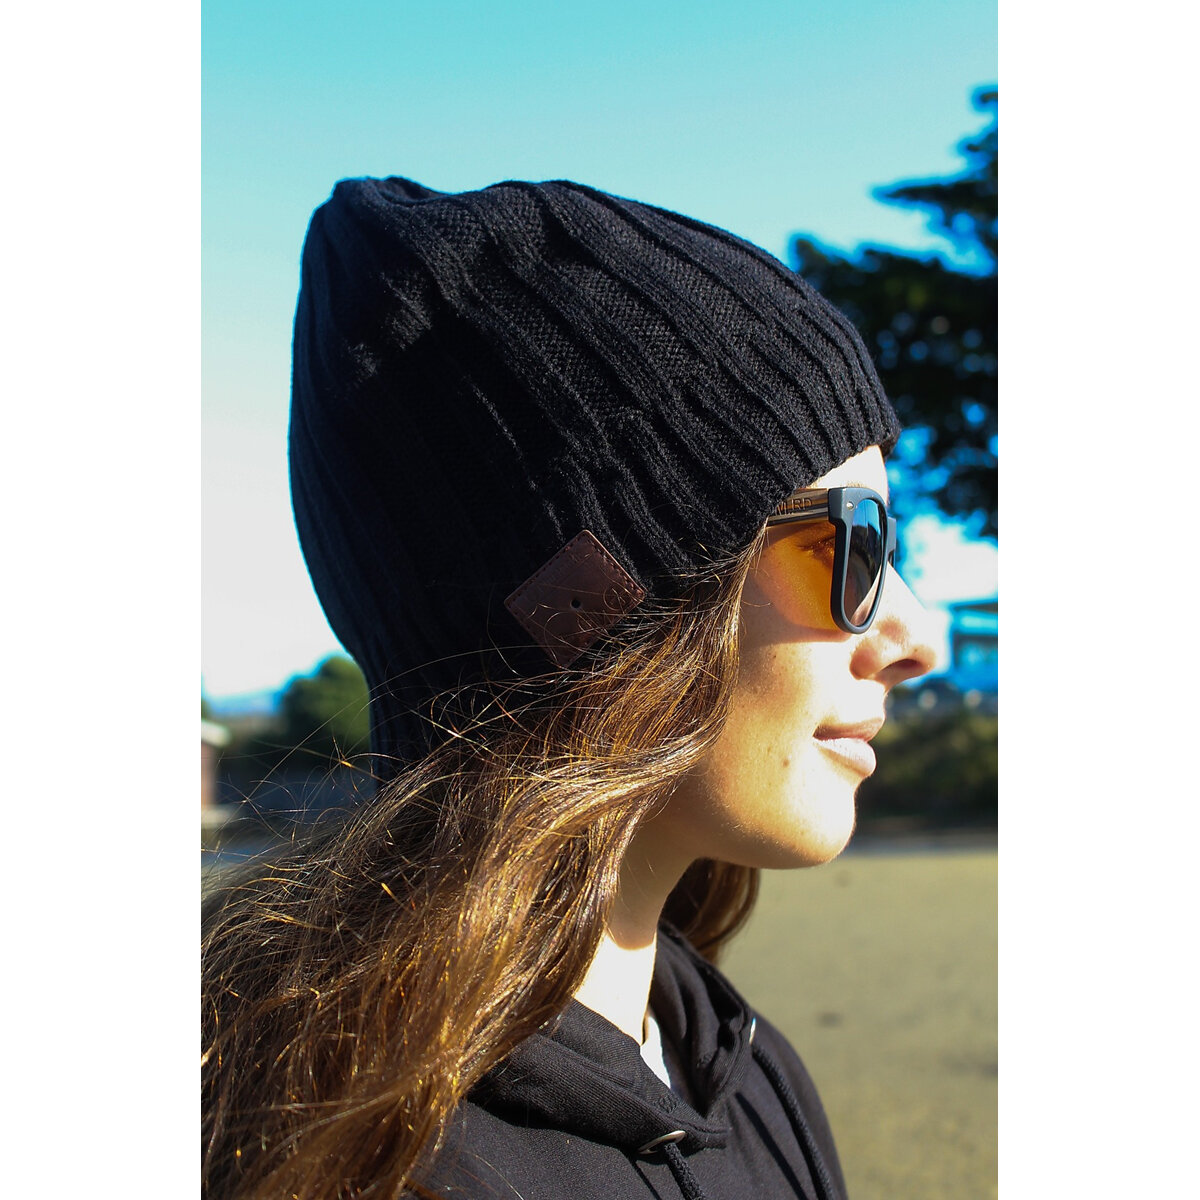 Moana Road Beanie with Built in Wireless Headphones Black